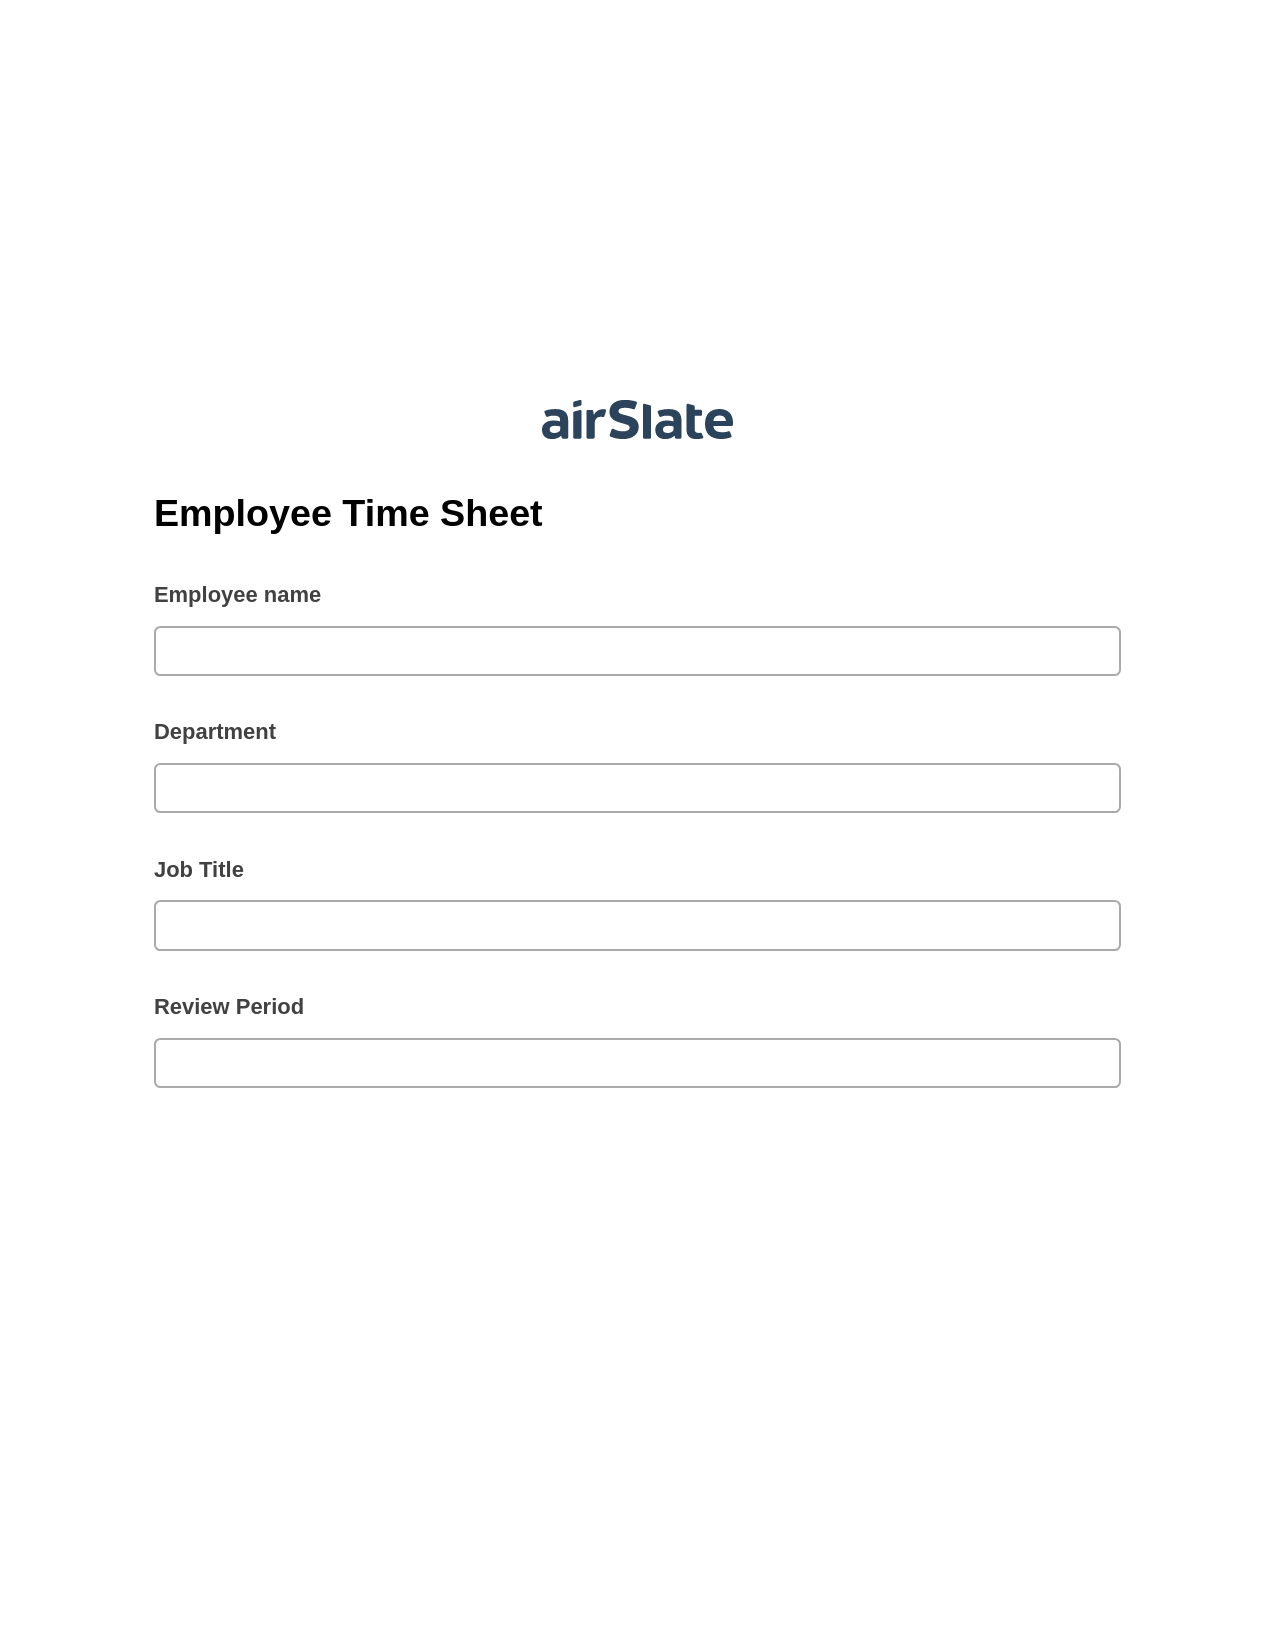 Multirole Employee Time Sheet Pre-fill from another Slate Bot, Create Salesforce Records Bot, Slack Notification Postfinish Bot